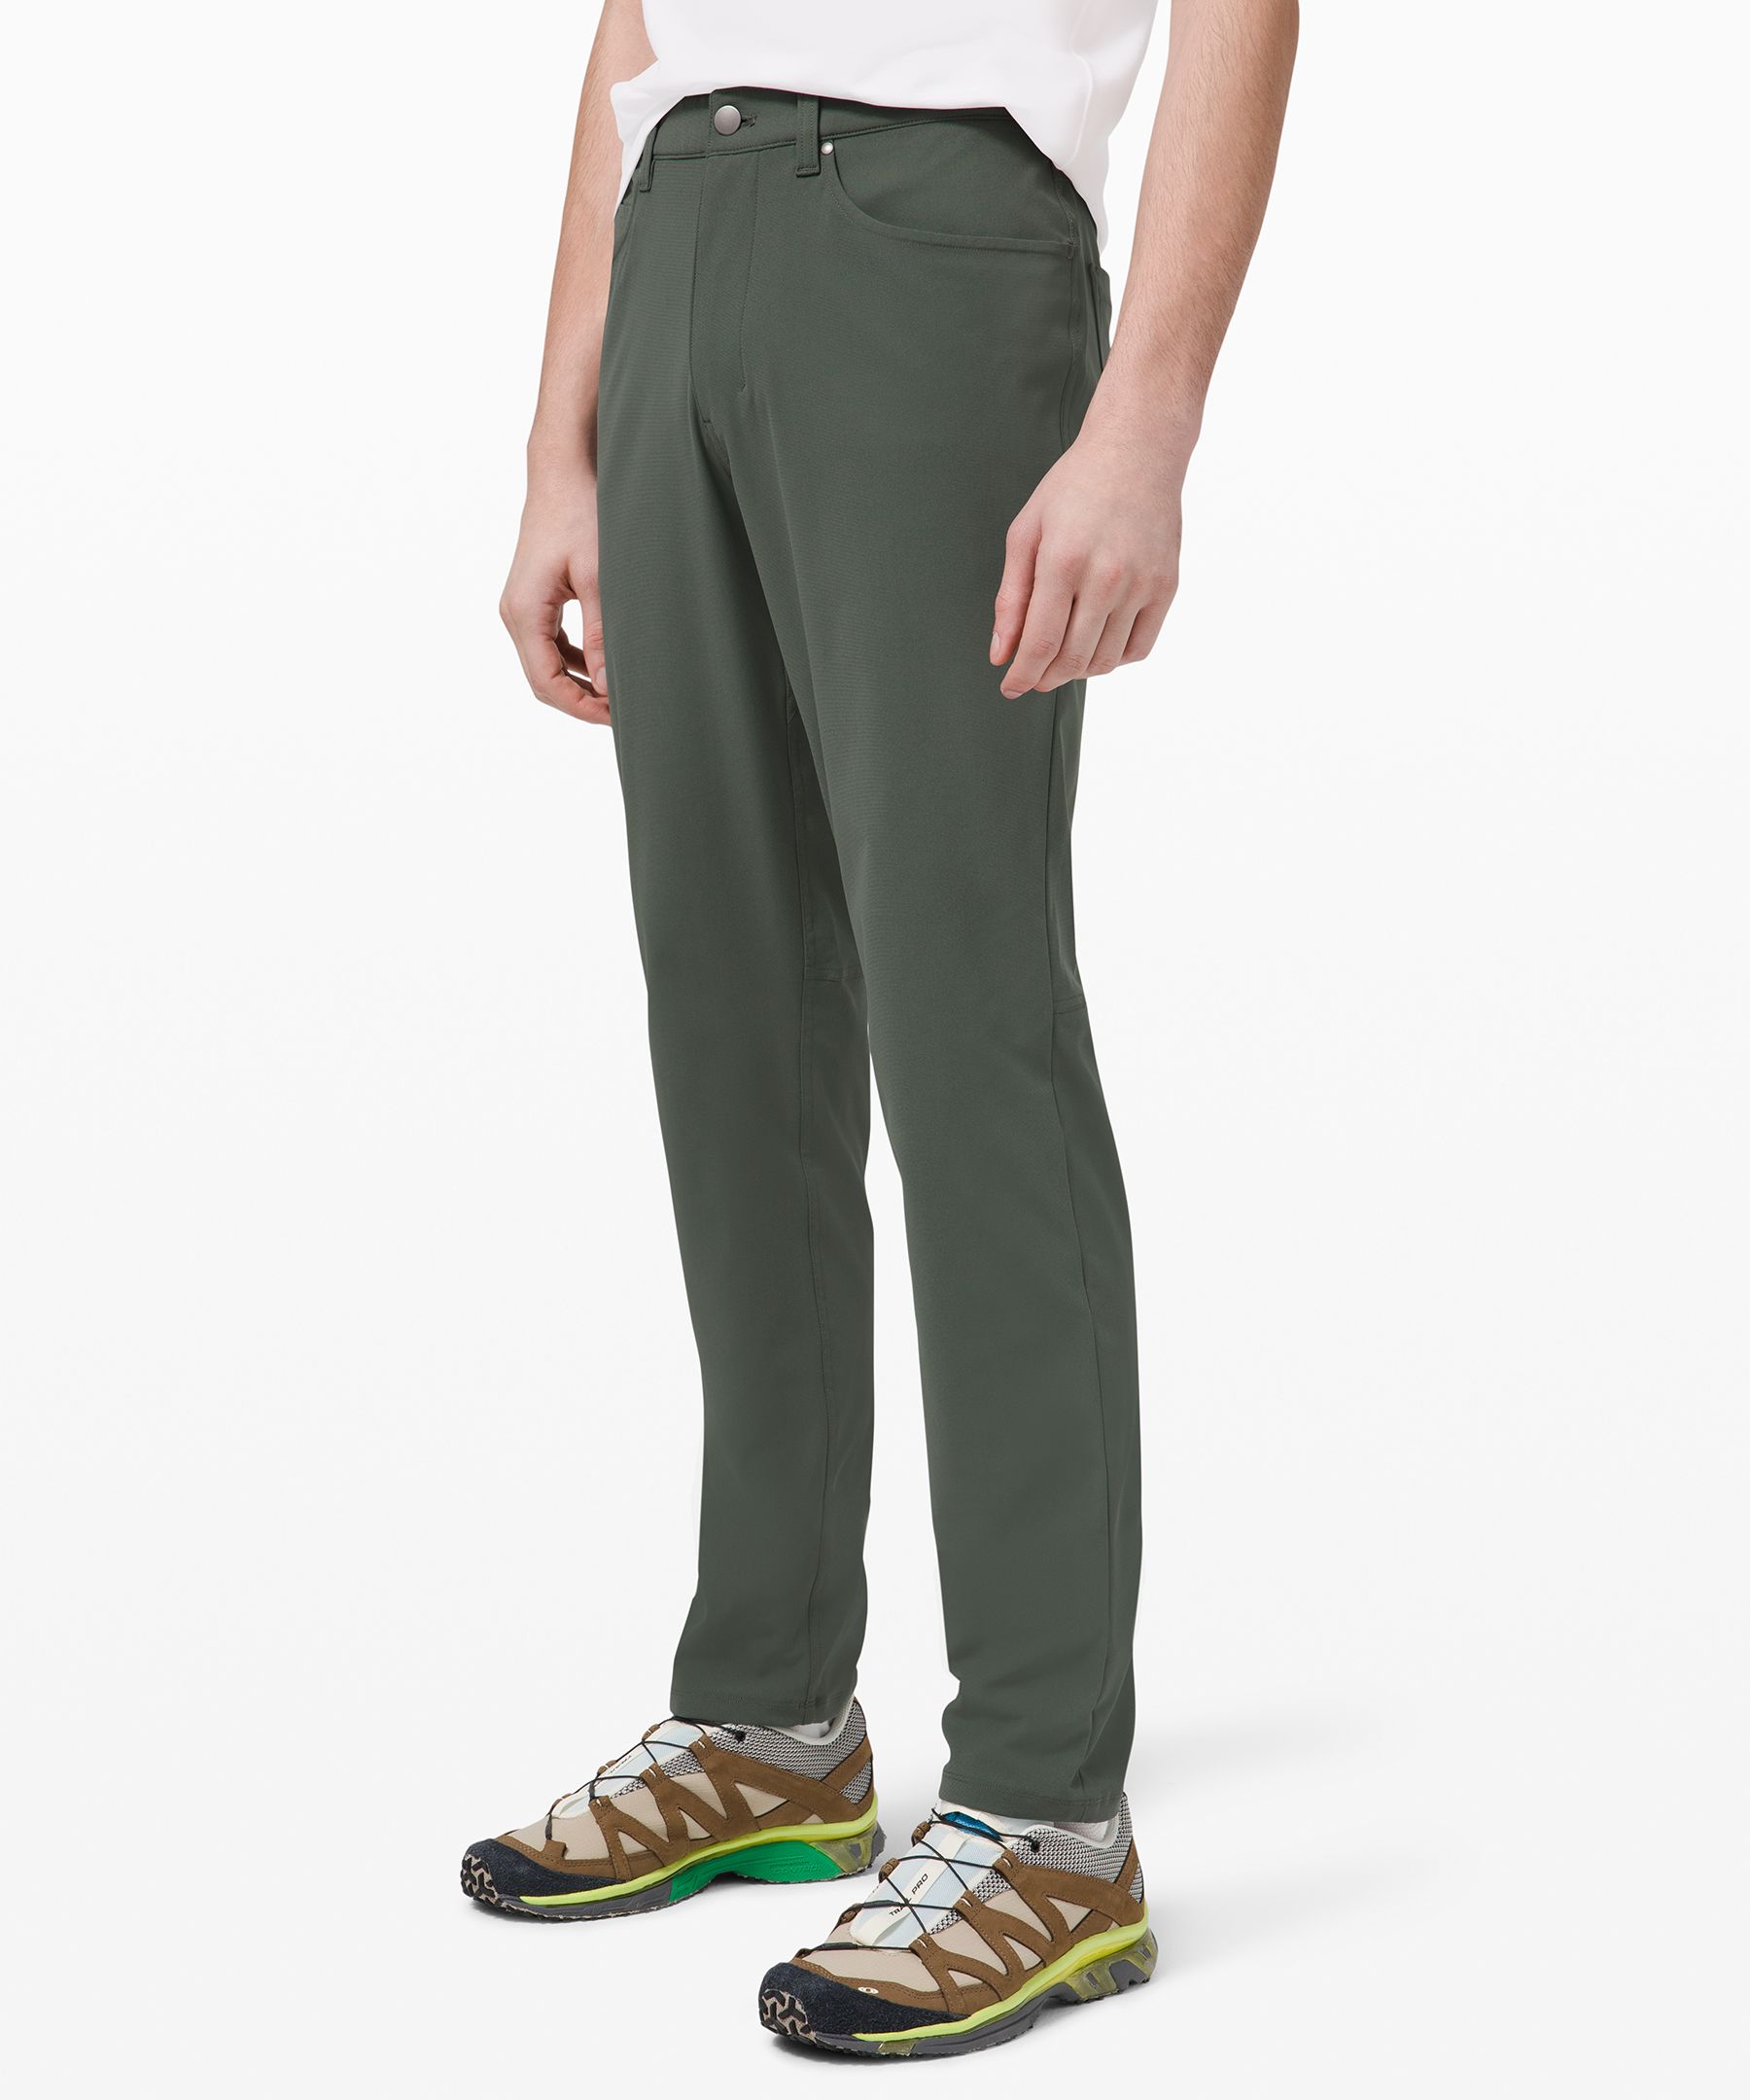 Lululemon Abc Pant Classic 30" *warpstreme Online Only In Green